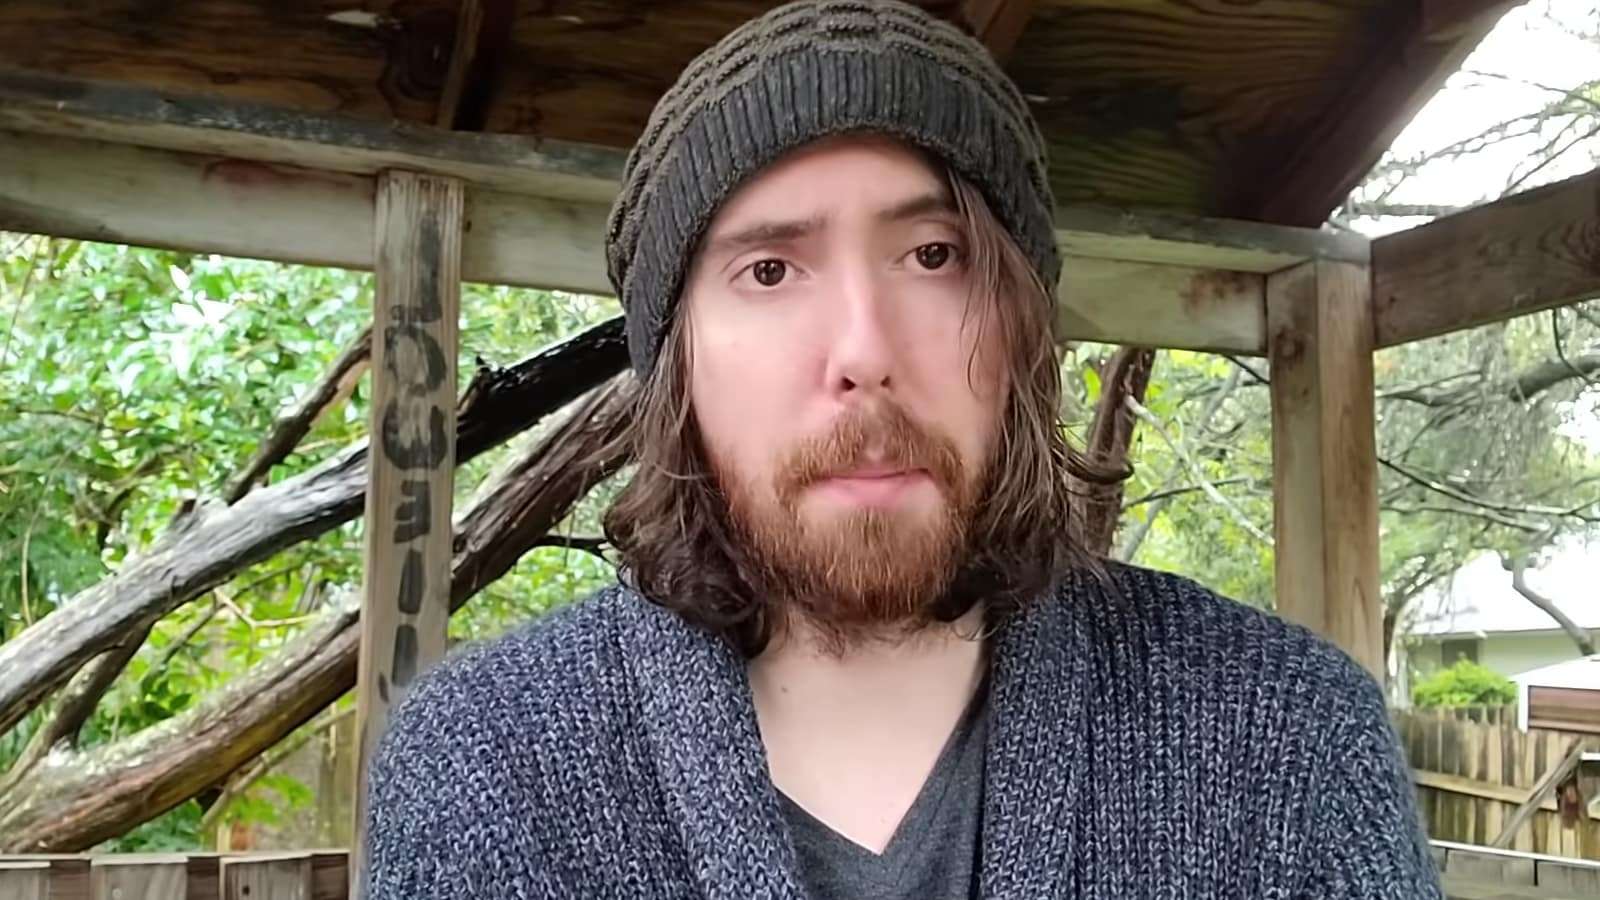 Asmongold waering green beanie and grey cardigan in treehouse